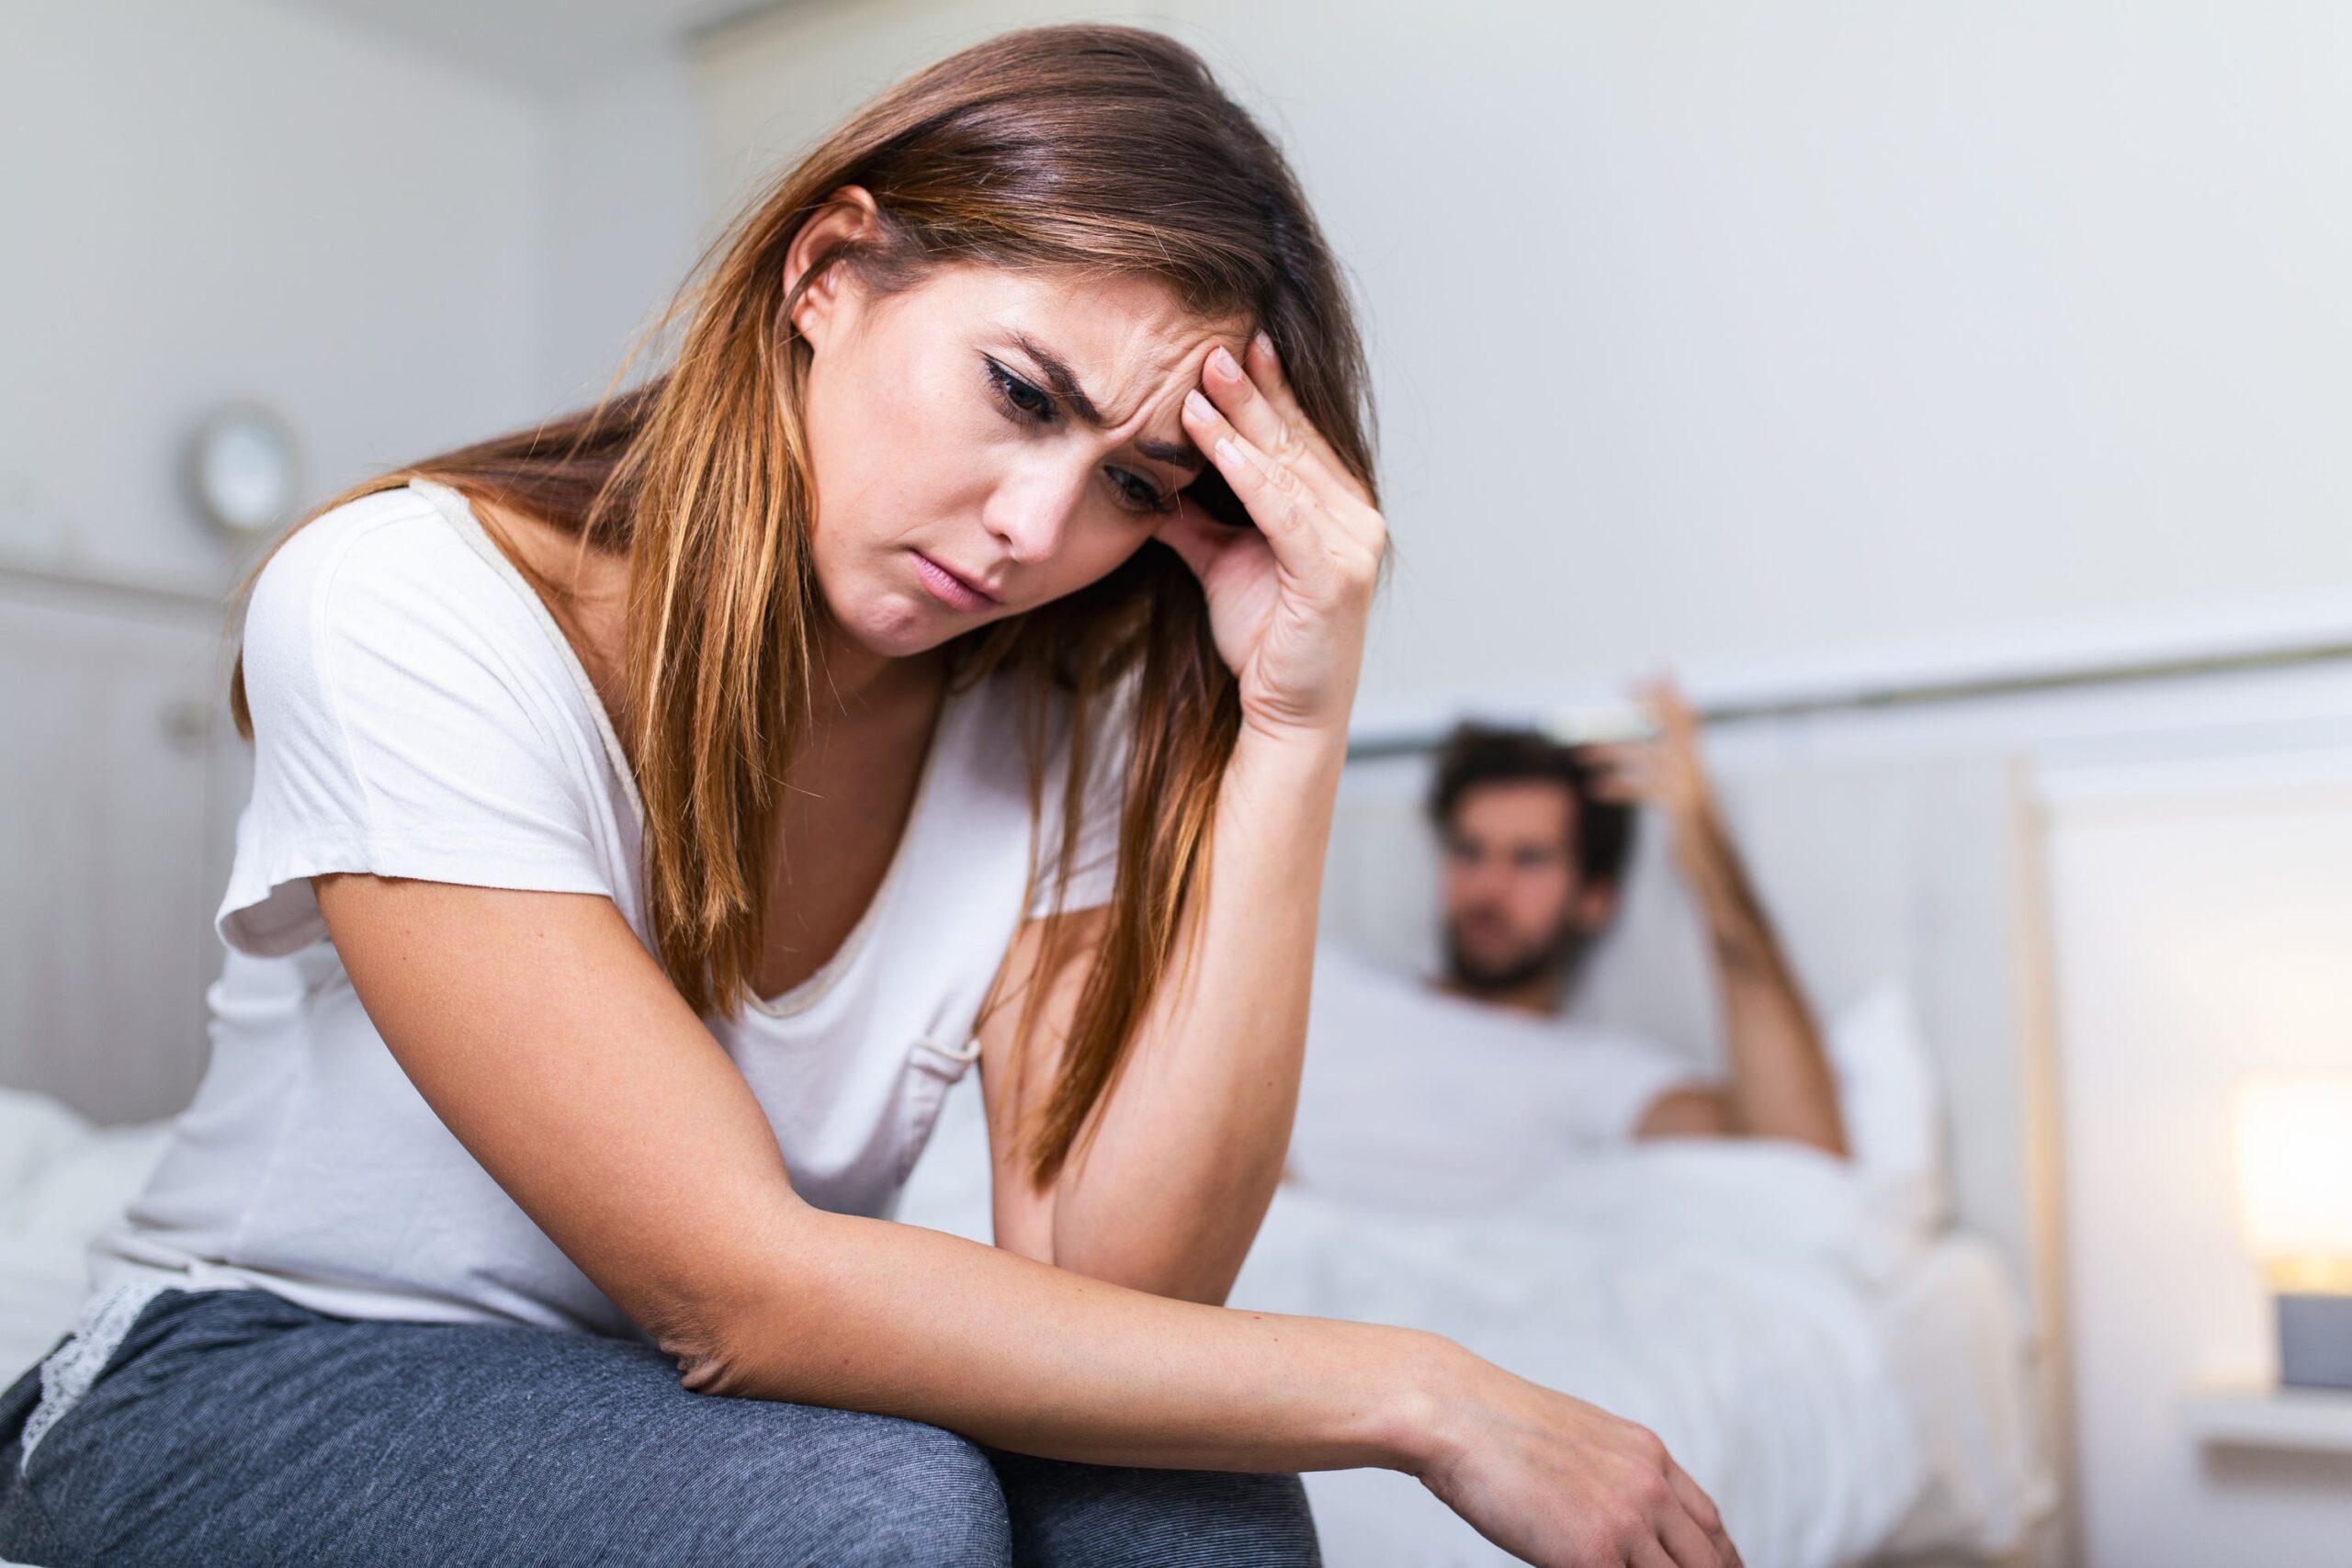 Can i save our marriage after my husband’s affair?